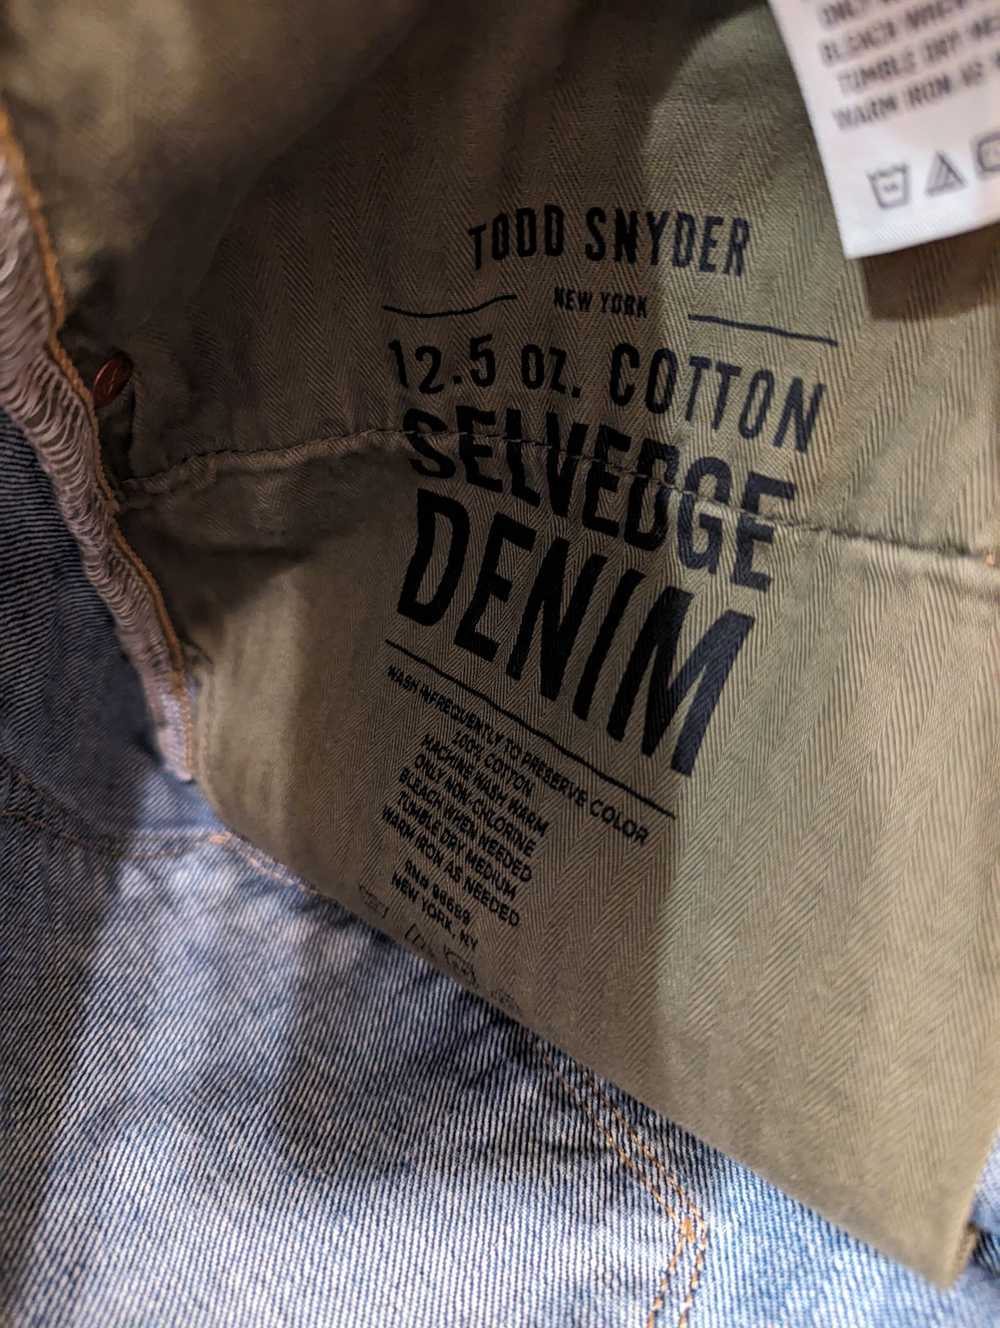 Todd Snyder Selvedge jeans - image 7